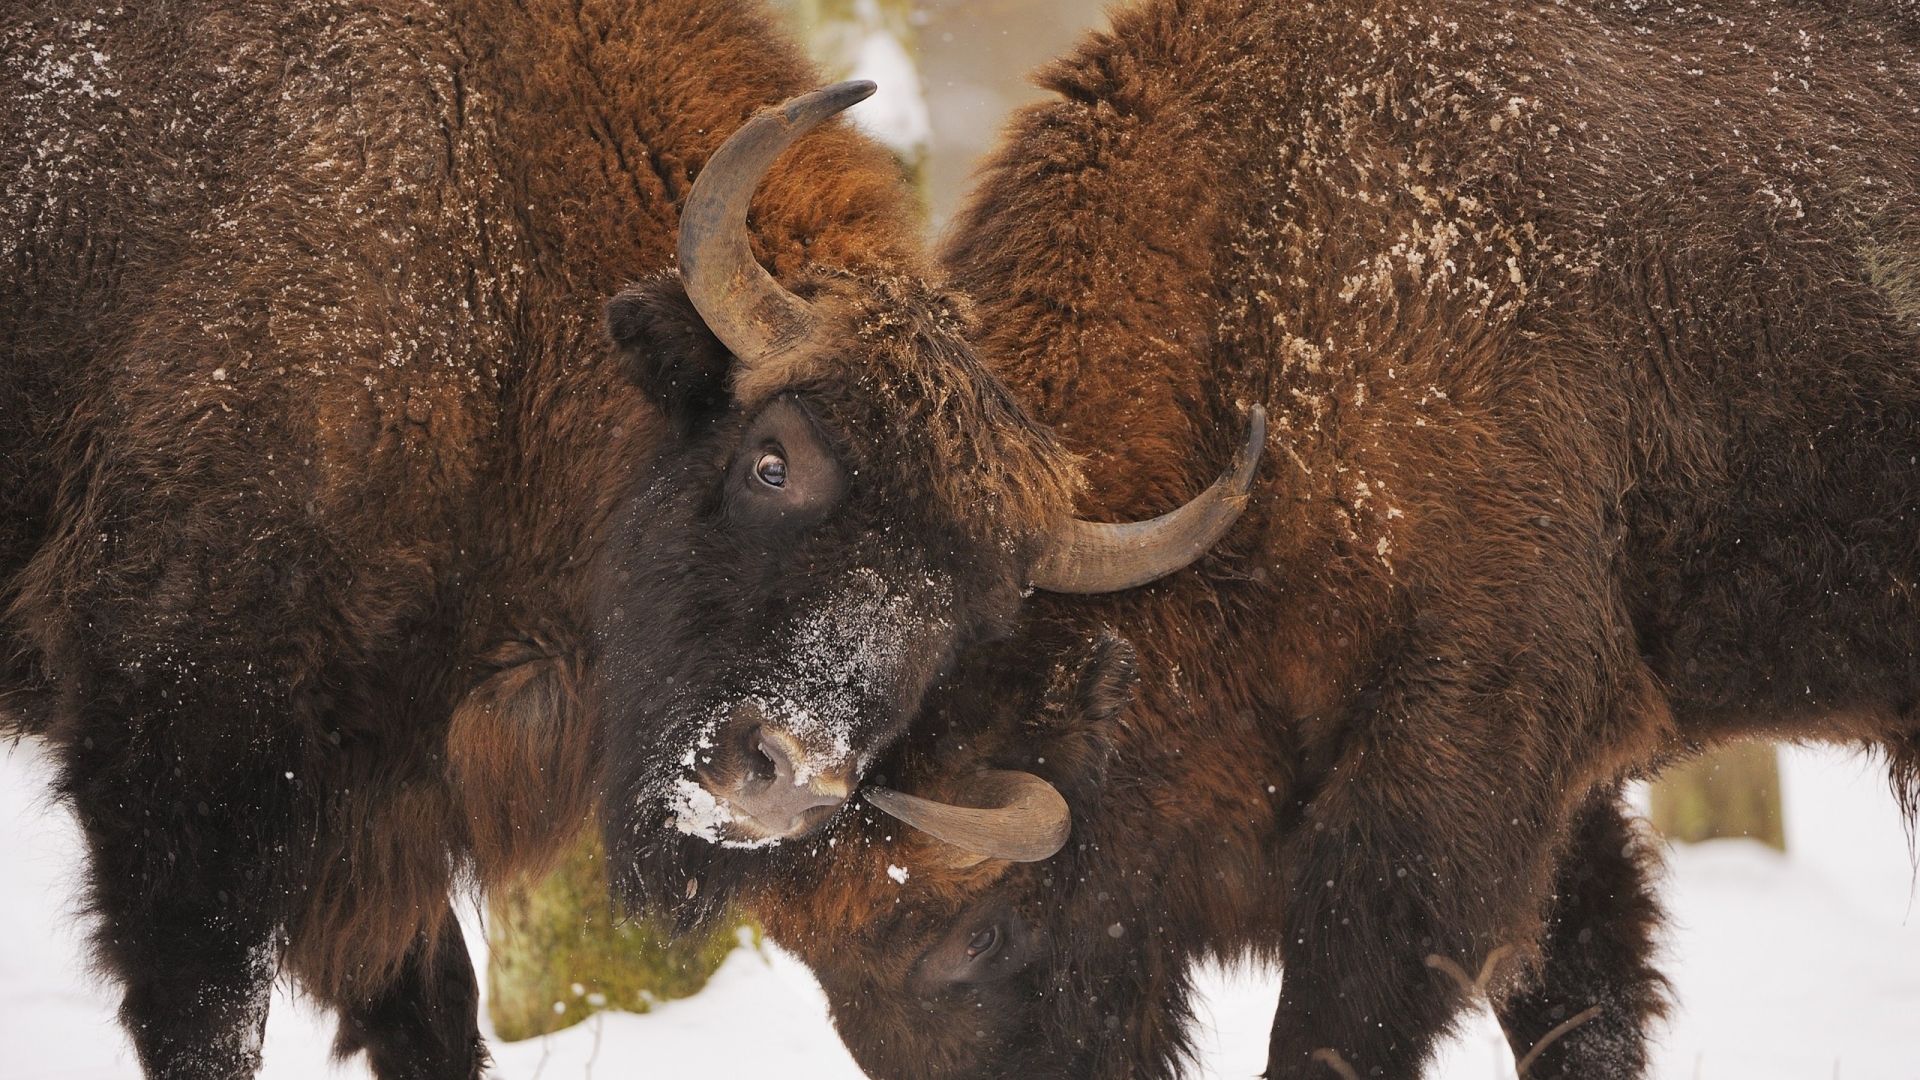 Bison Fight for 1920 x 1080 HDTV 1080p resolution